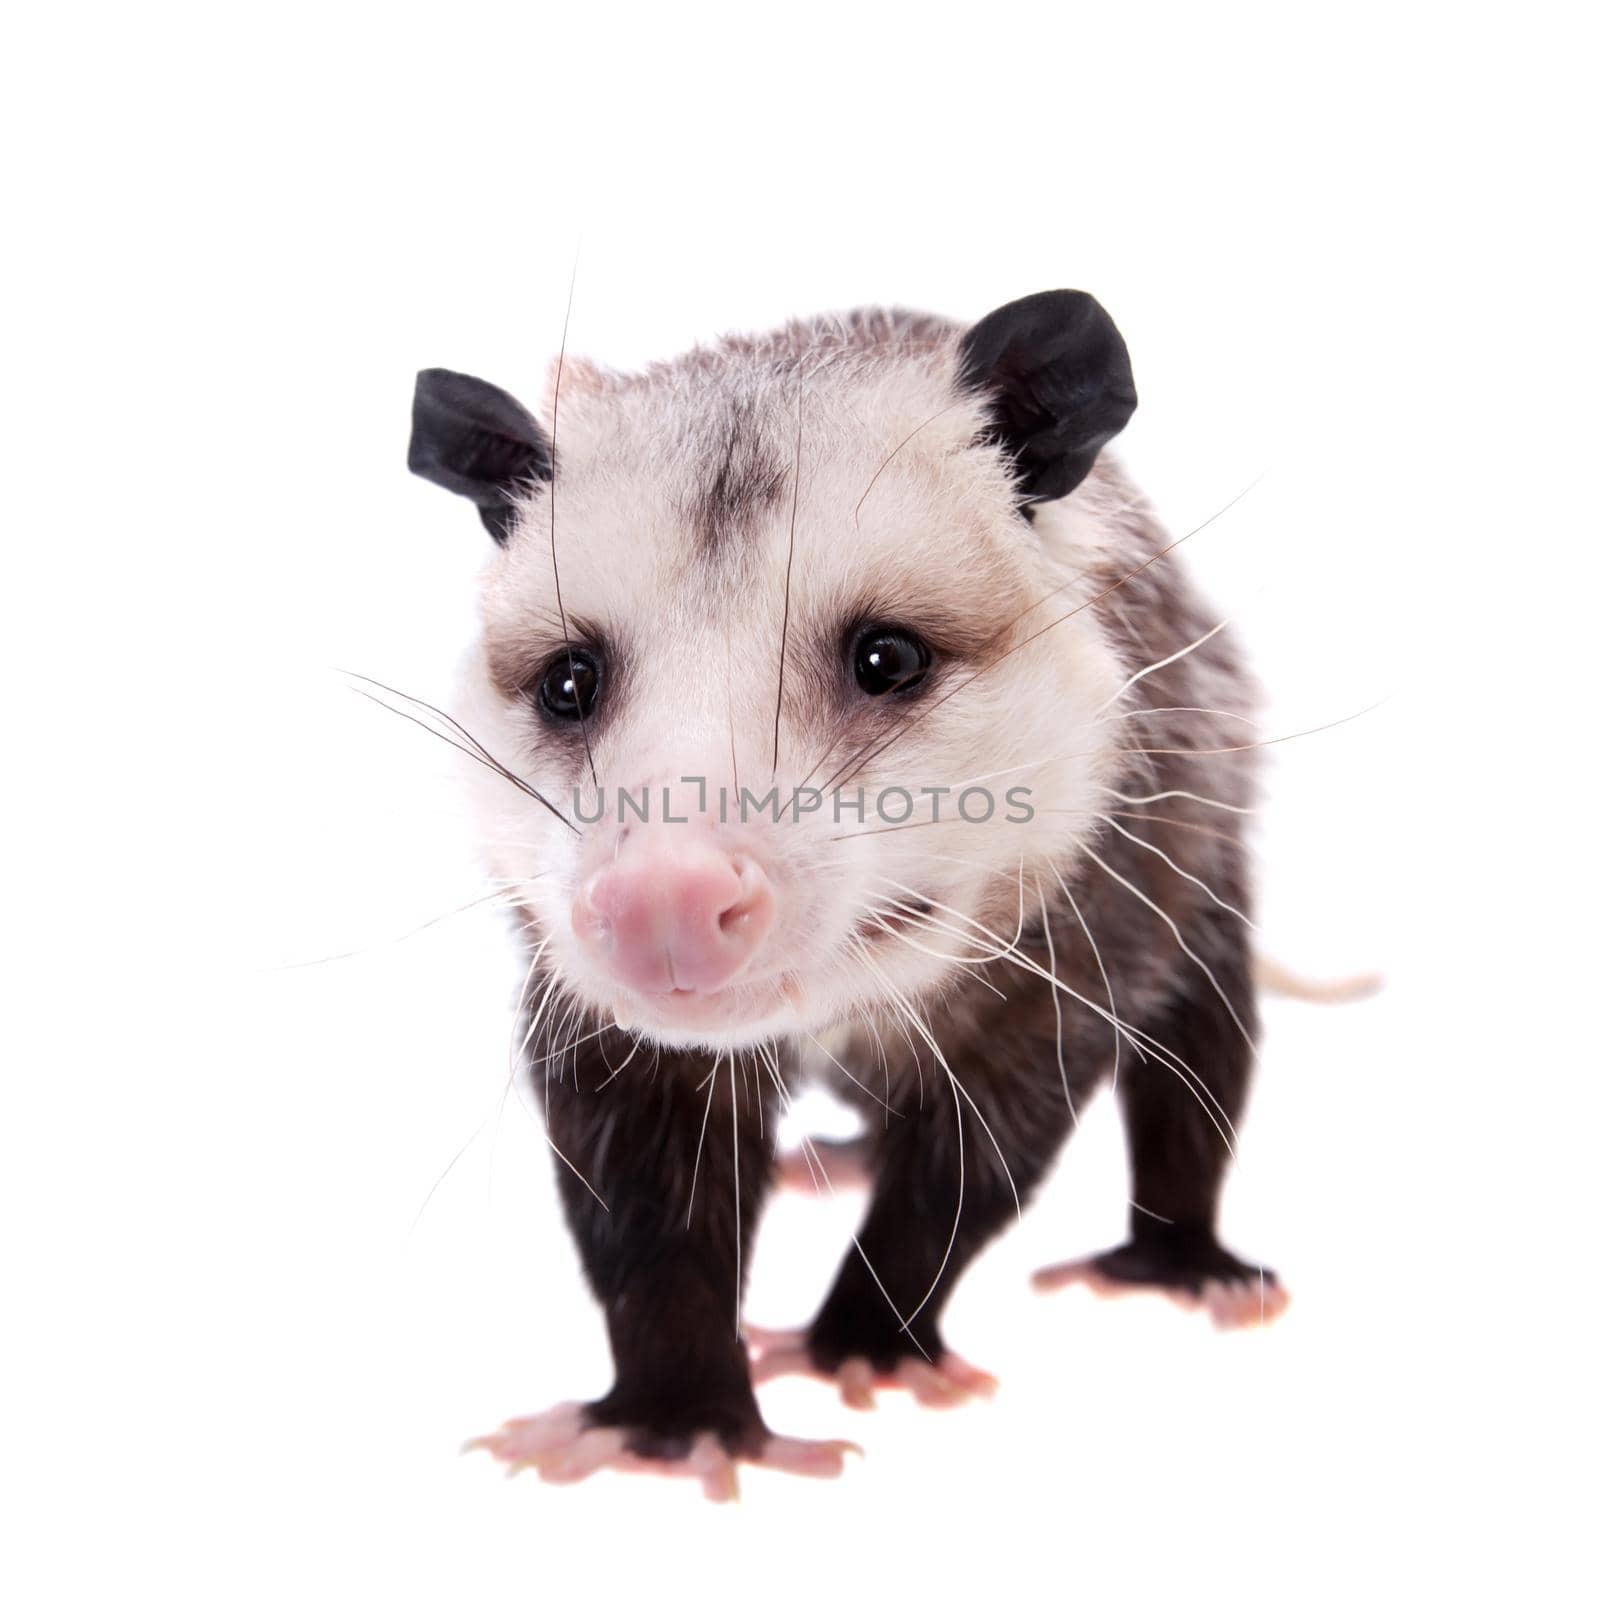 The Virginia or North American opossum, Didelphis virginiana, isolated on white background